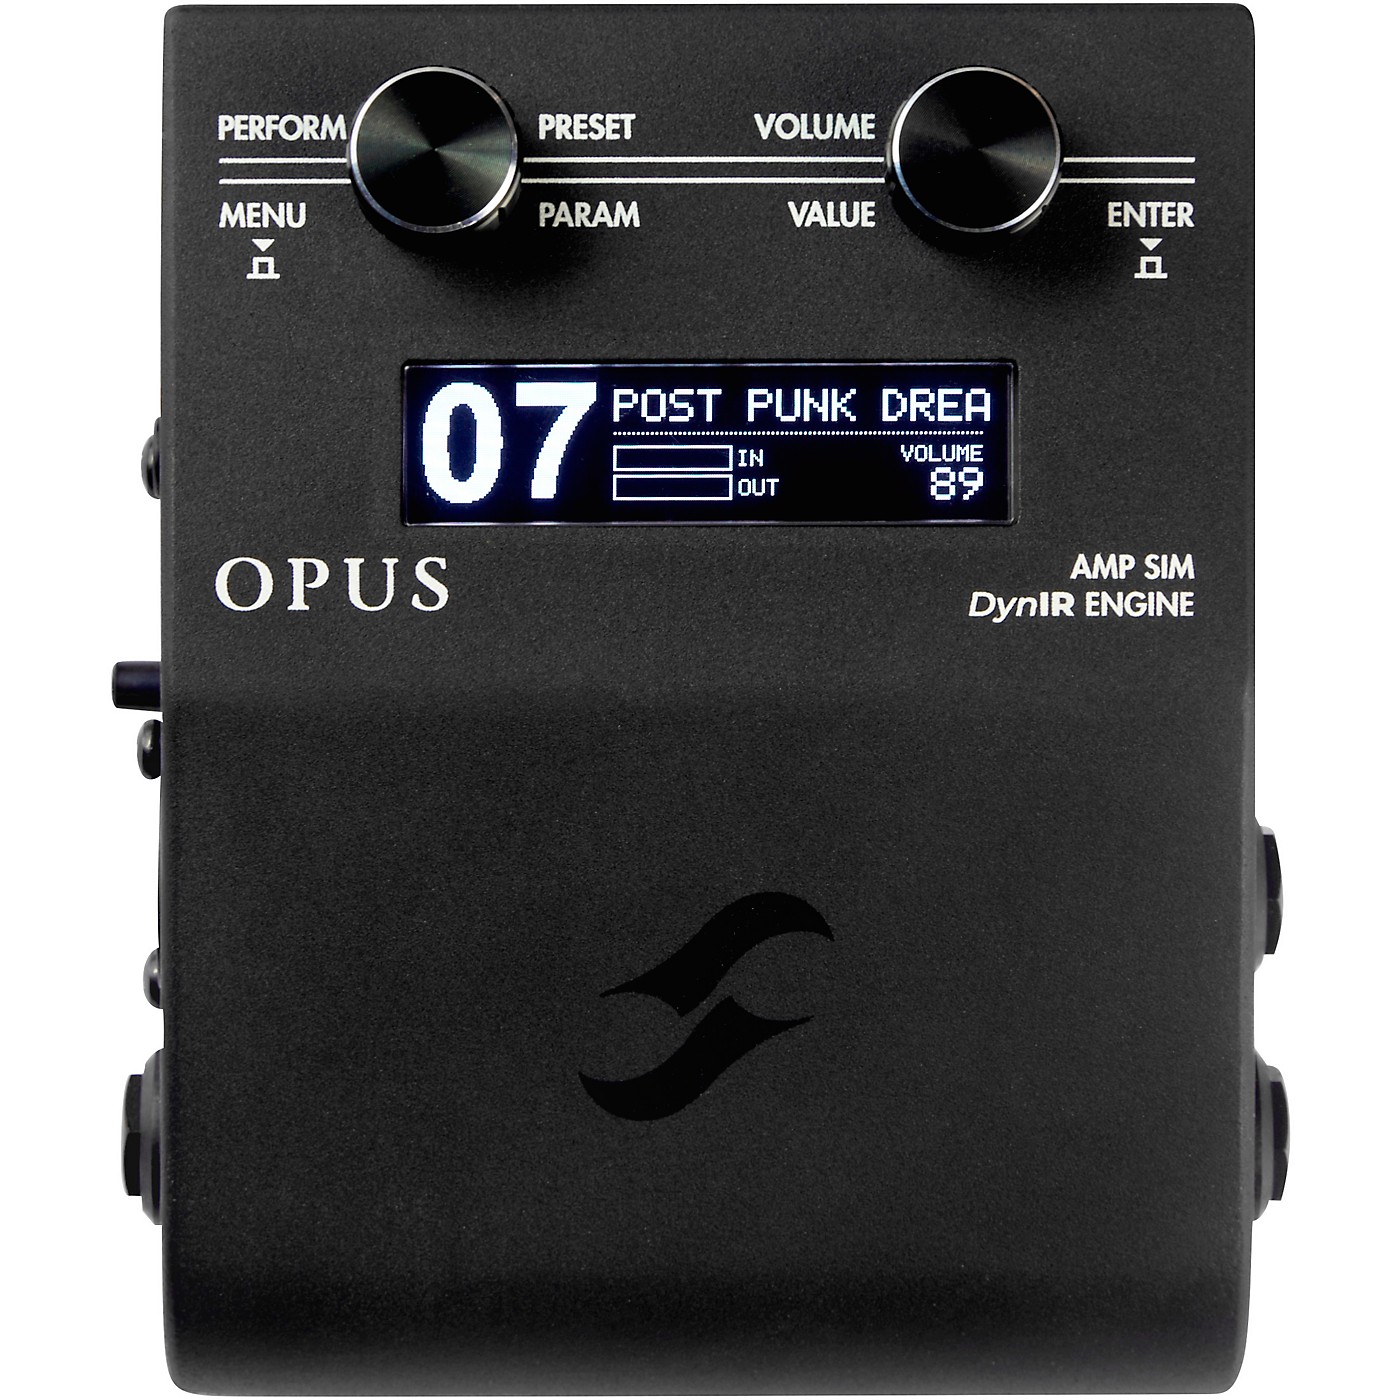 Two Notes Audio Engineering Opus Amp Sim and DynIR Engine Effects Pedal thumbnail